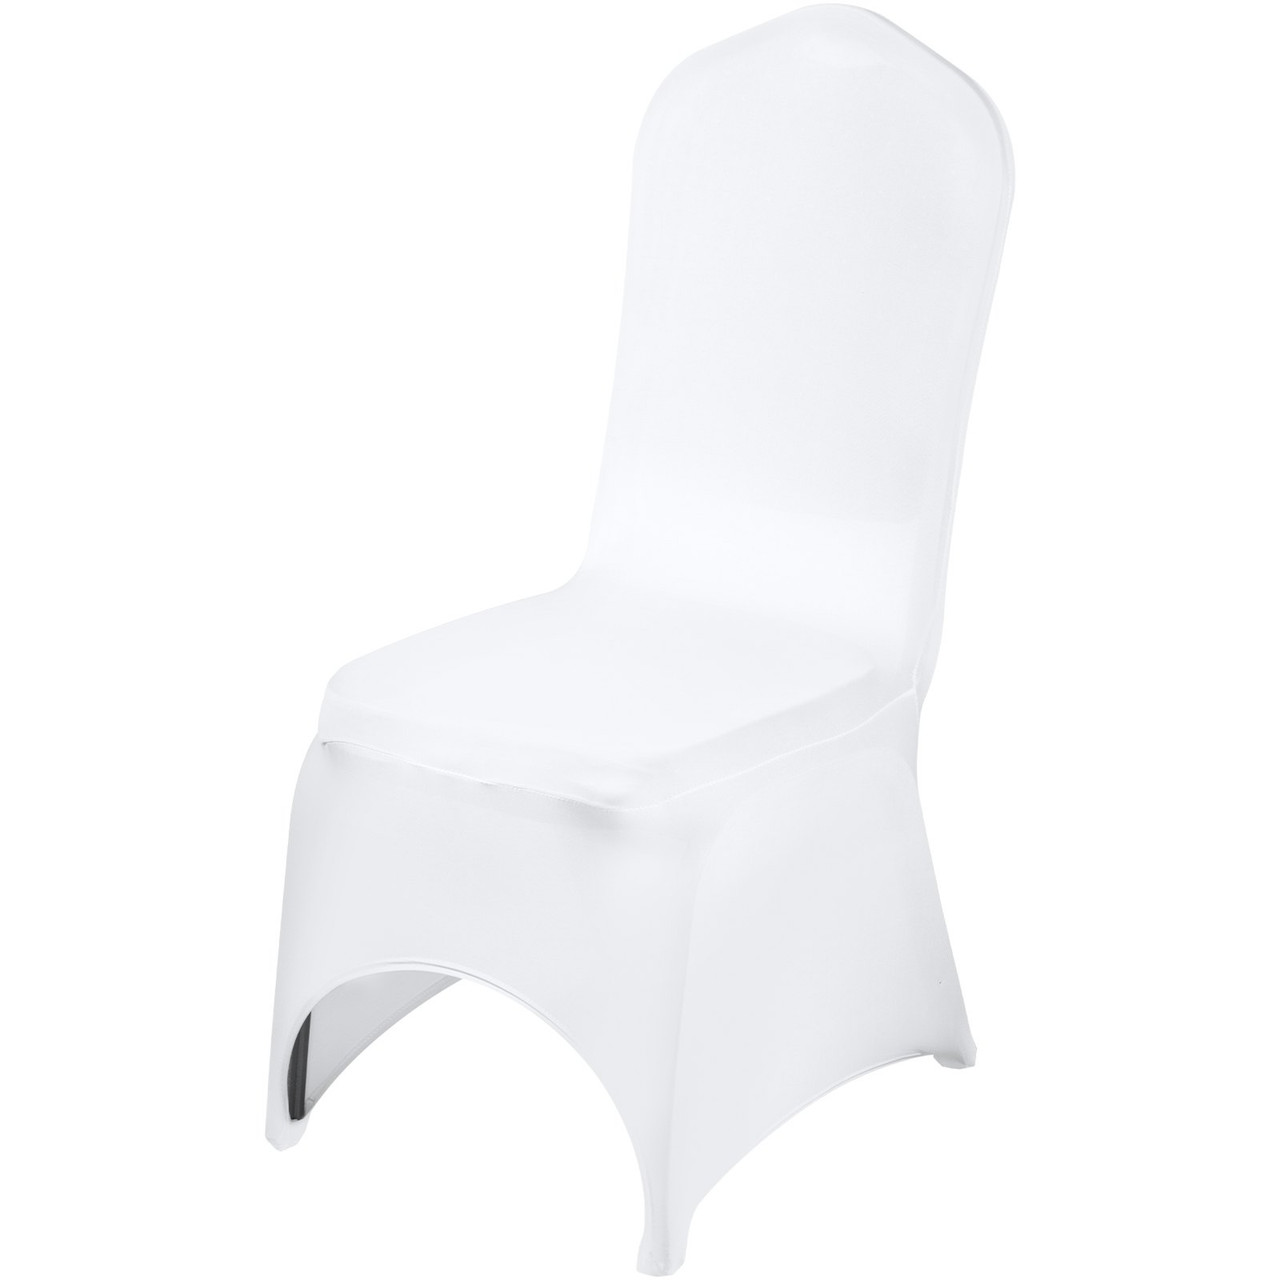 Universal 100 Pcs Polyester Spandex Wedding Chair Covers